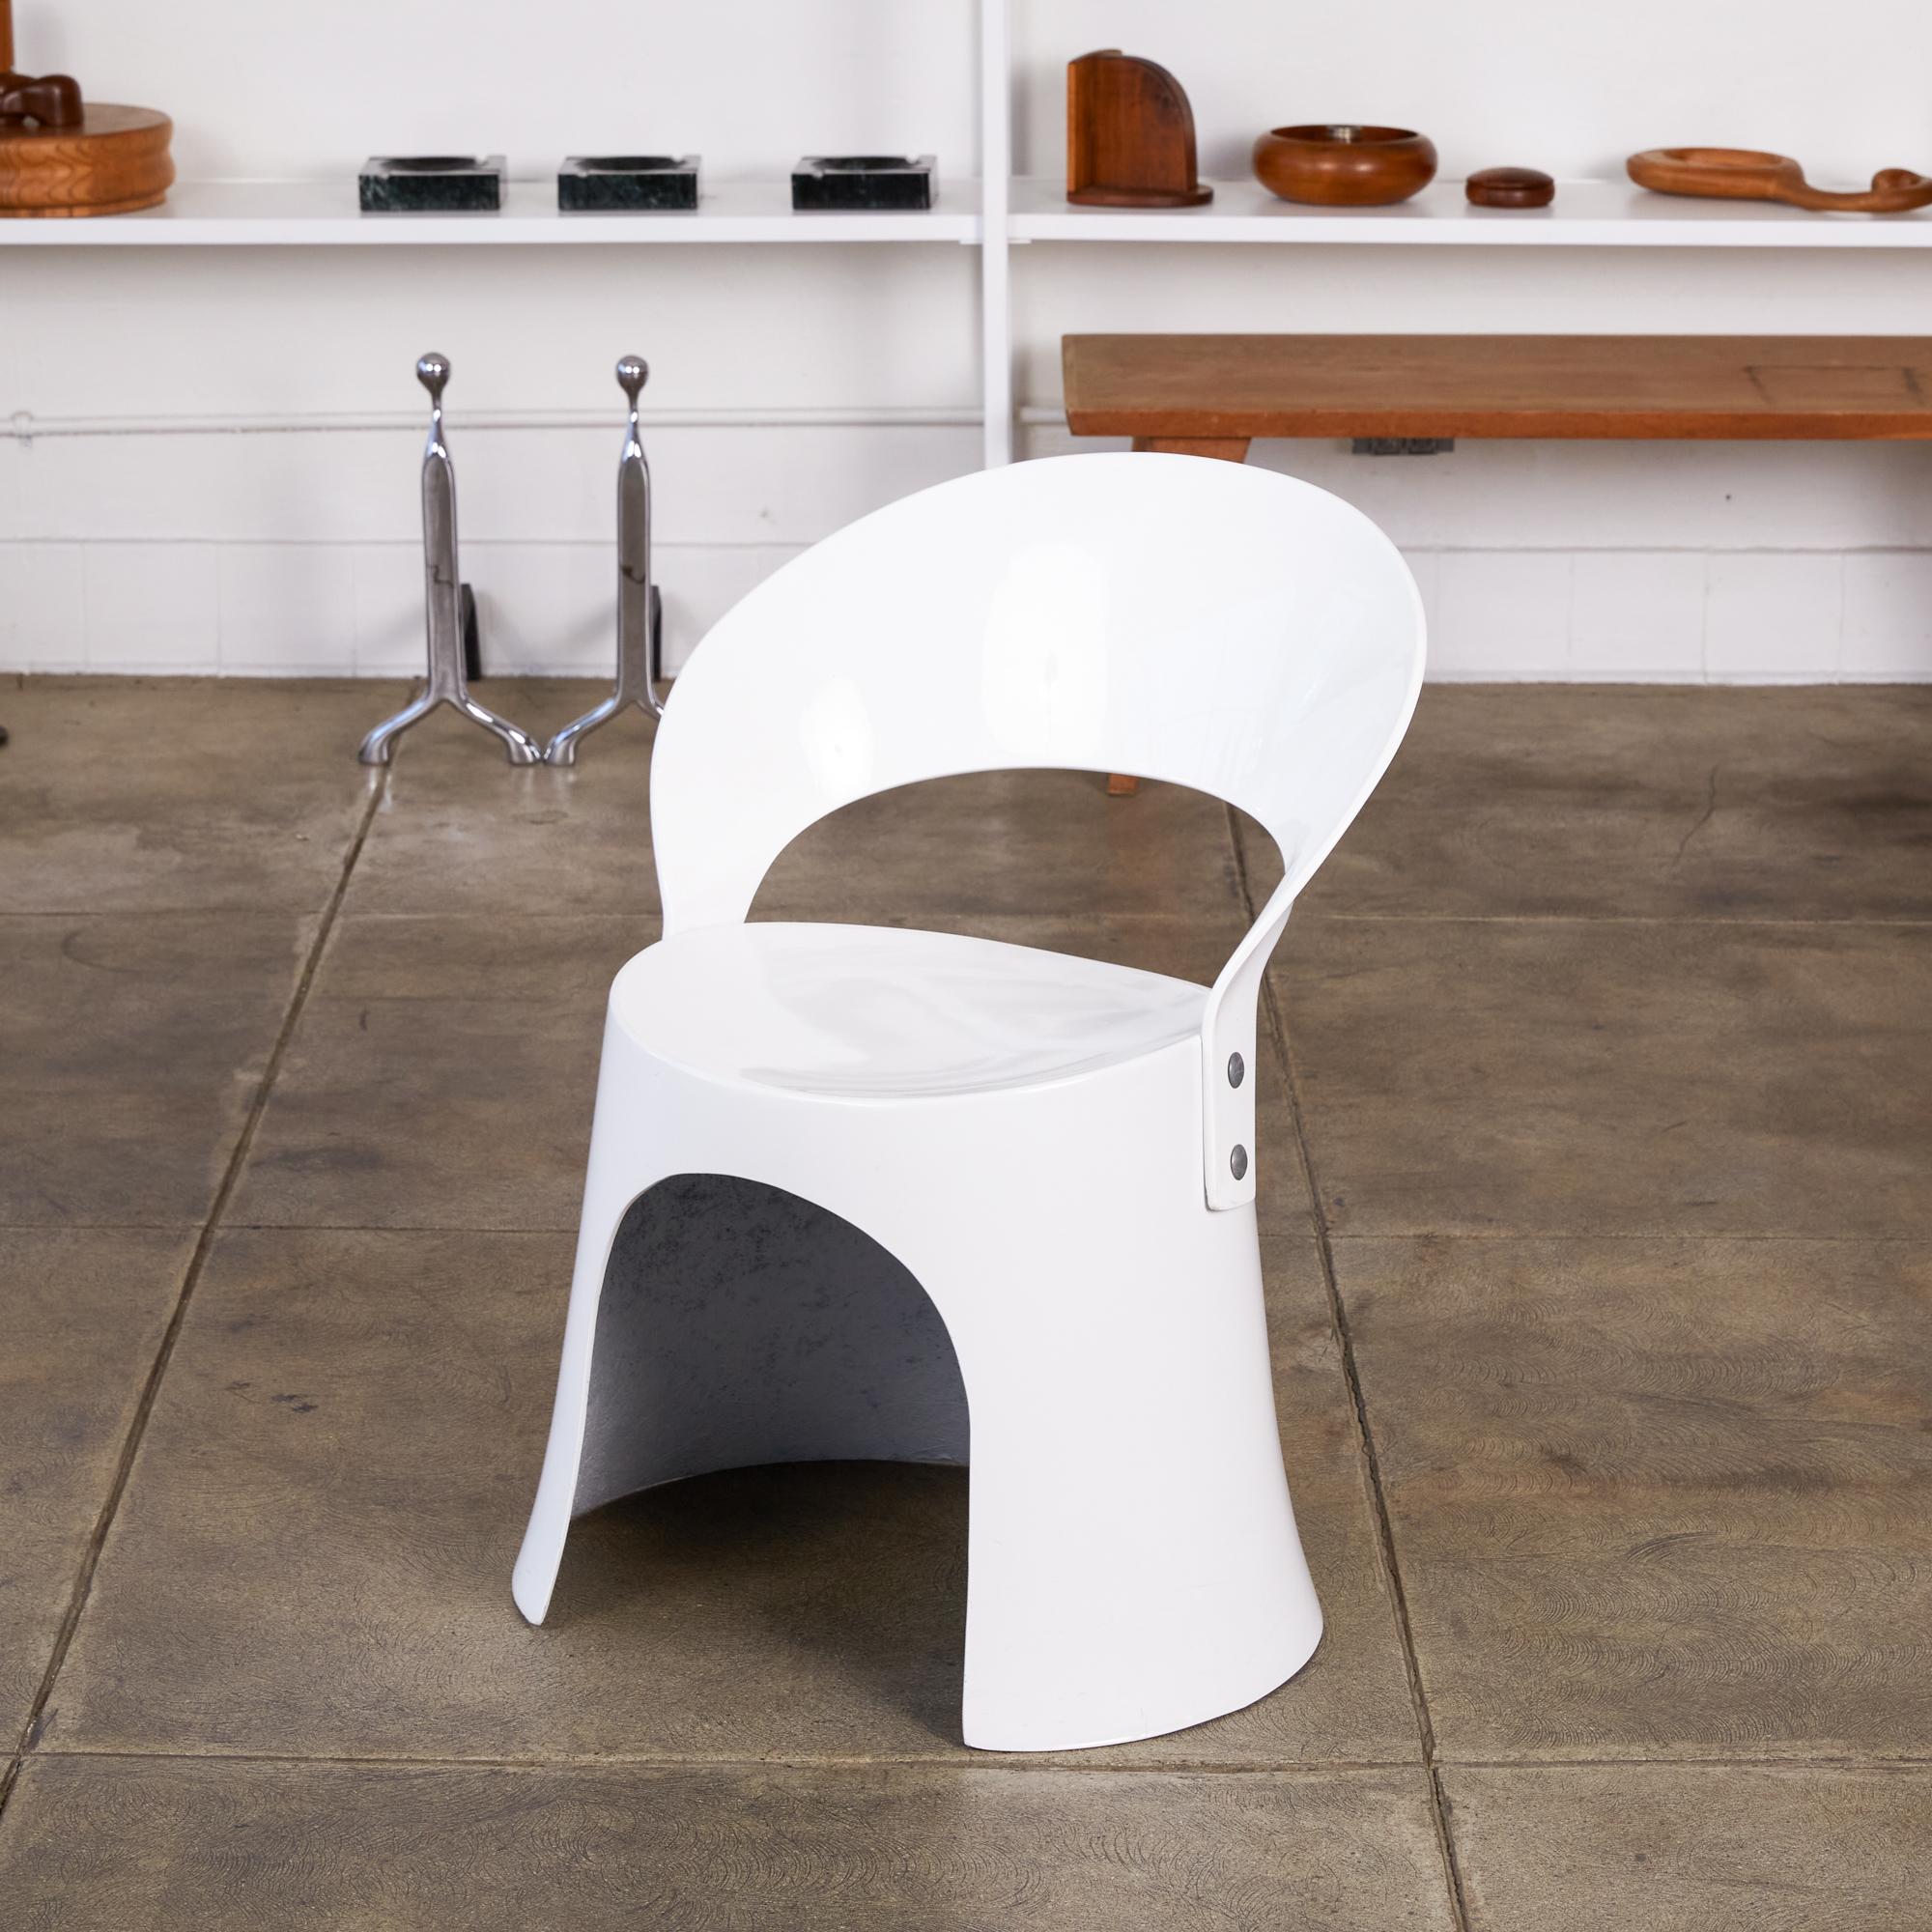 A single white fiberglass side chair by Nanna Ditzel for Odense Maskinsnedkeri. The Model 5301-2 was produced for retail by Domus Danica beginning in 1969 and has a simple, two-part construction with a Space Age sensibility. An oblong fiberglass